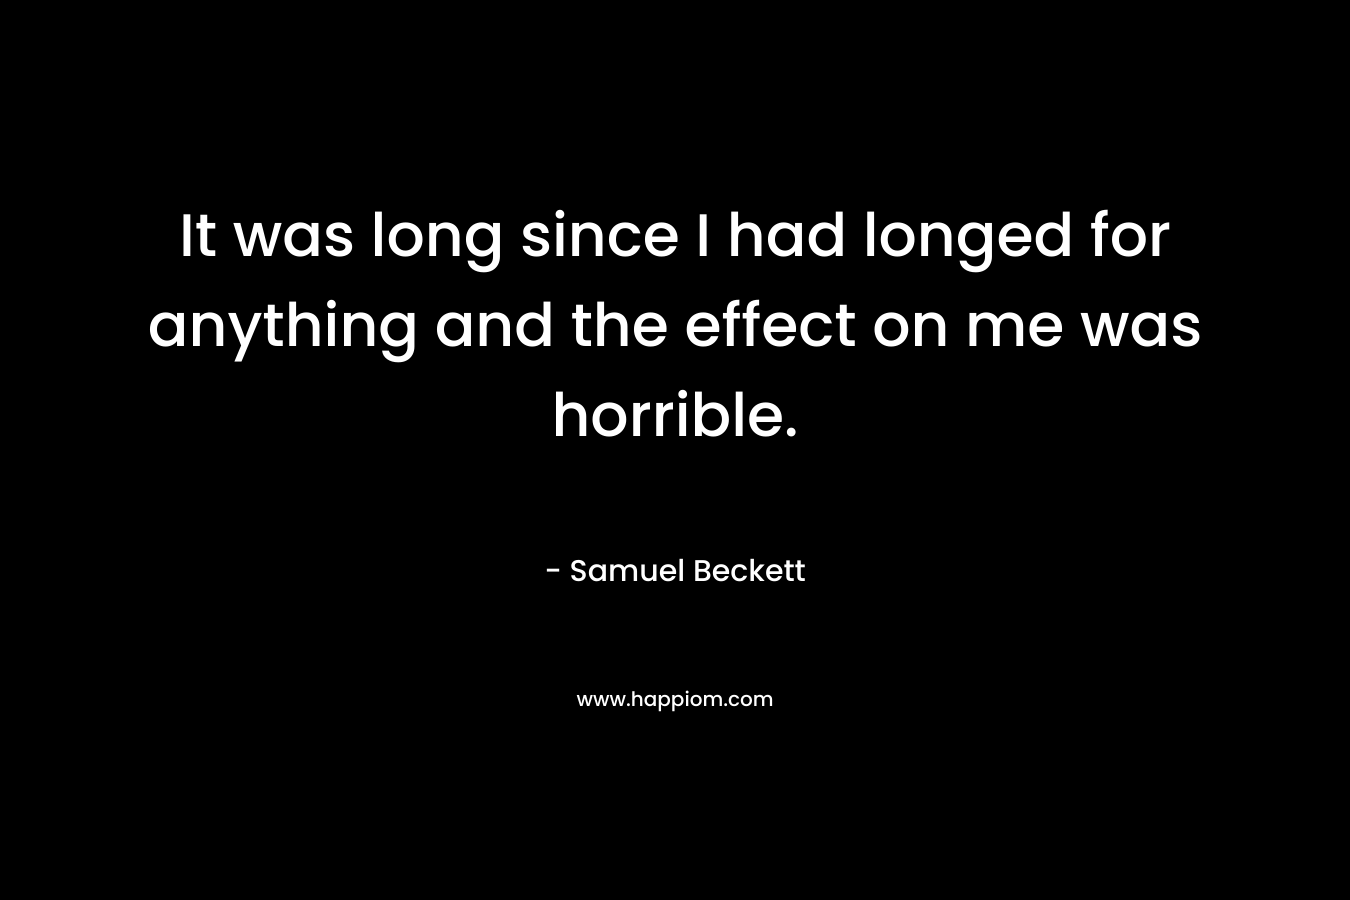 It was long since I had longed for anything and the effect on me was horrible. – Samuel Beckett